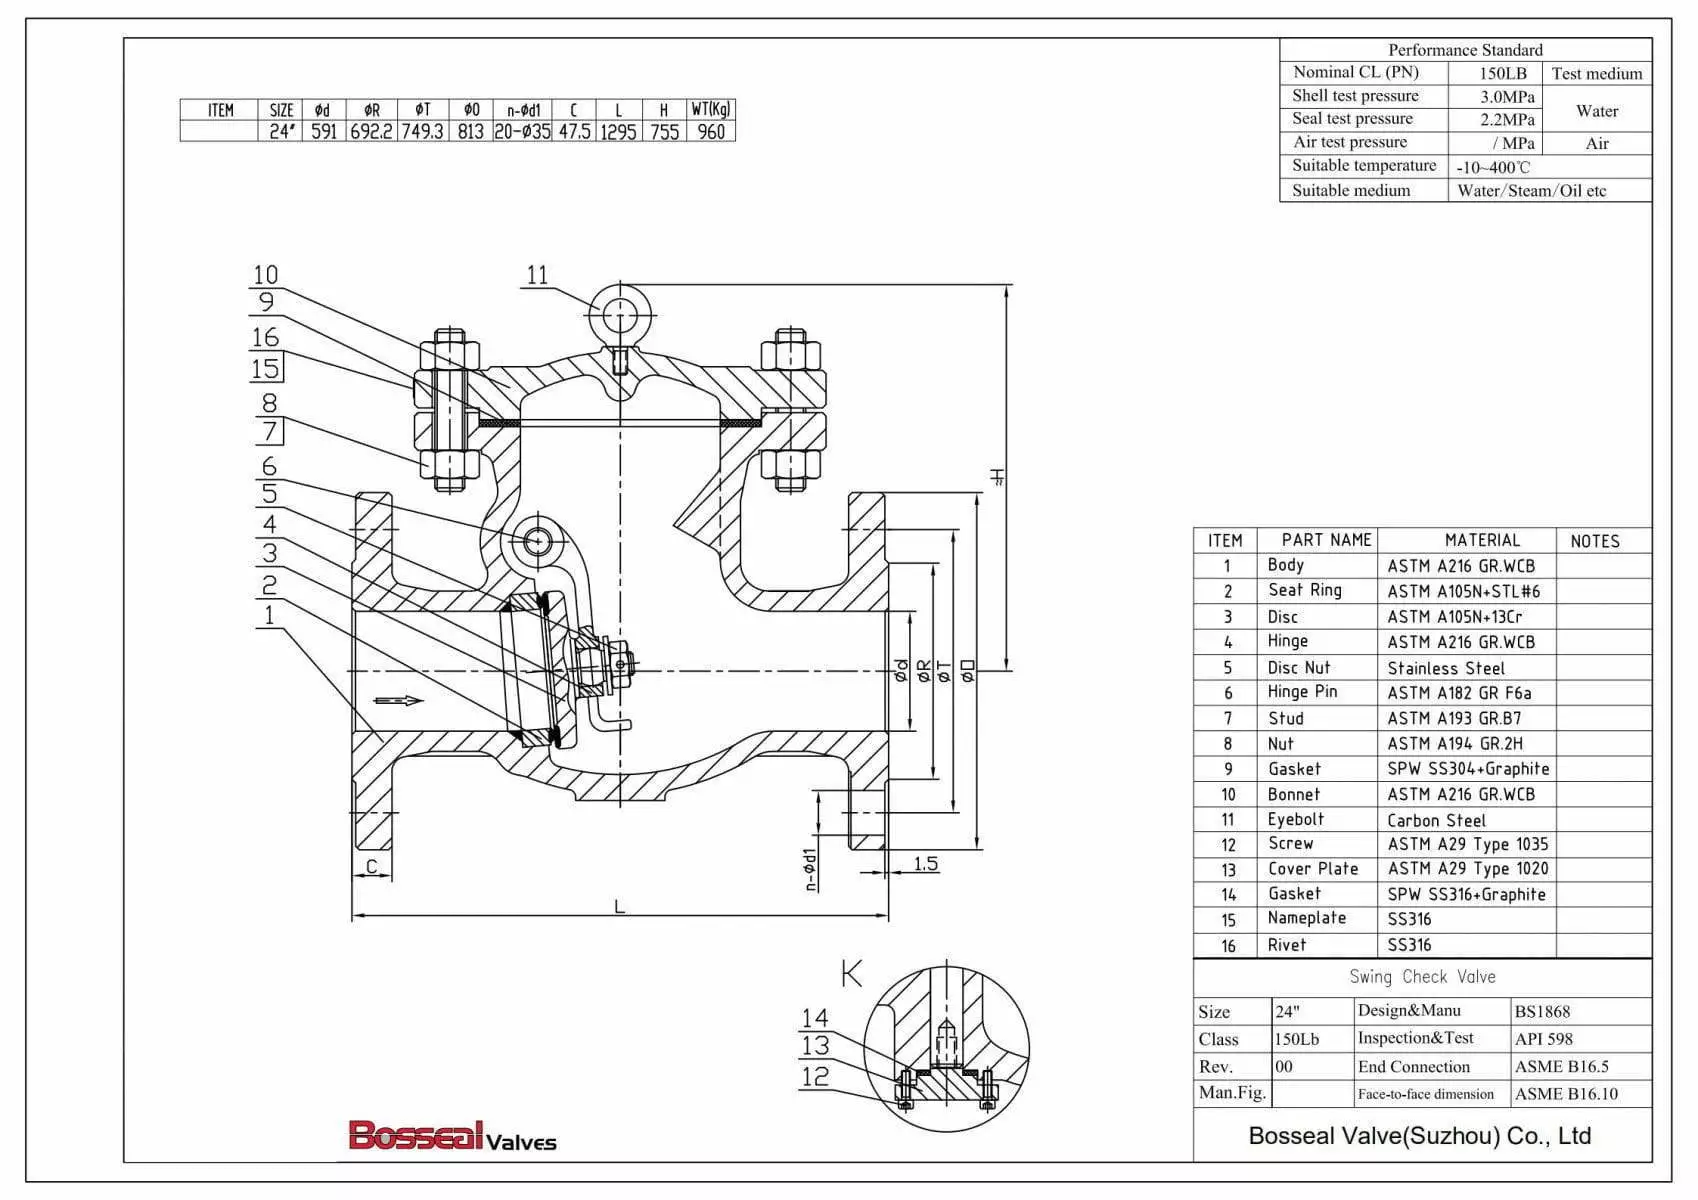 Swing Check Valve Technical Drawing